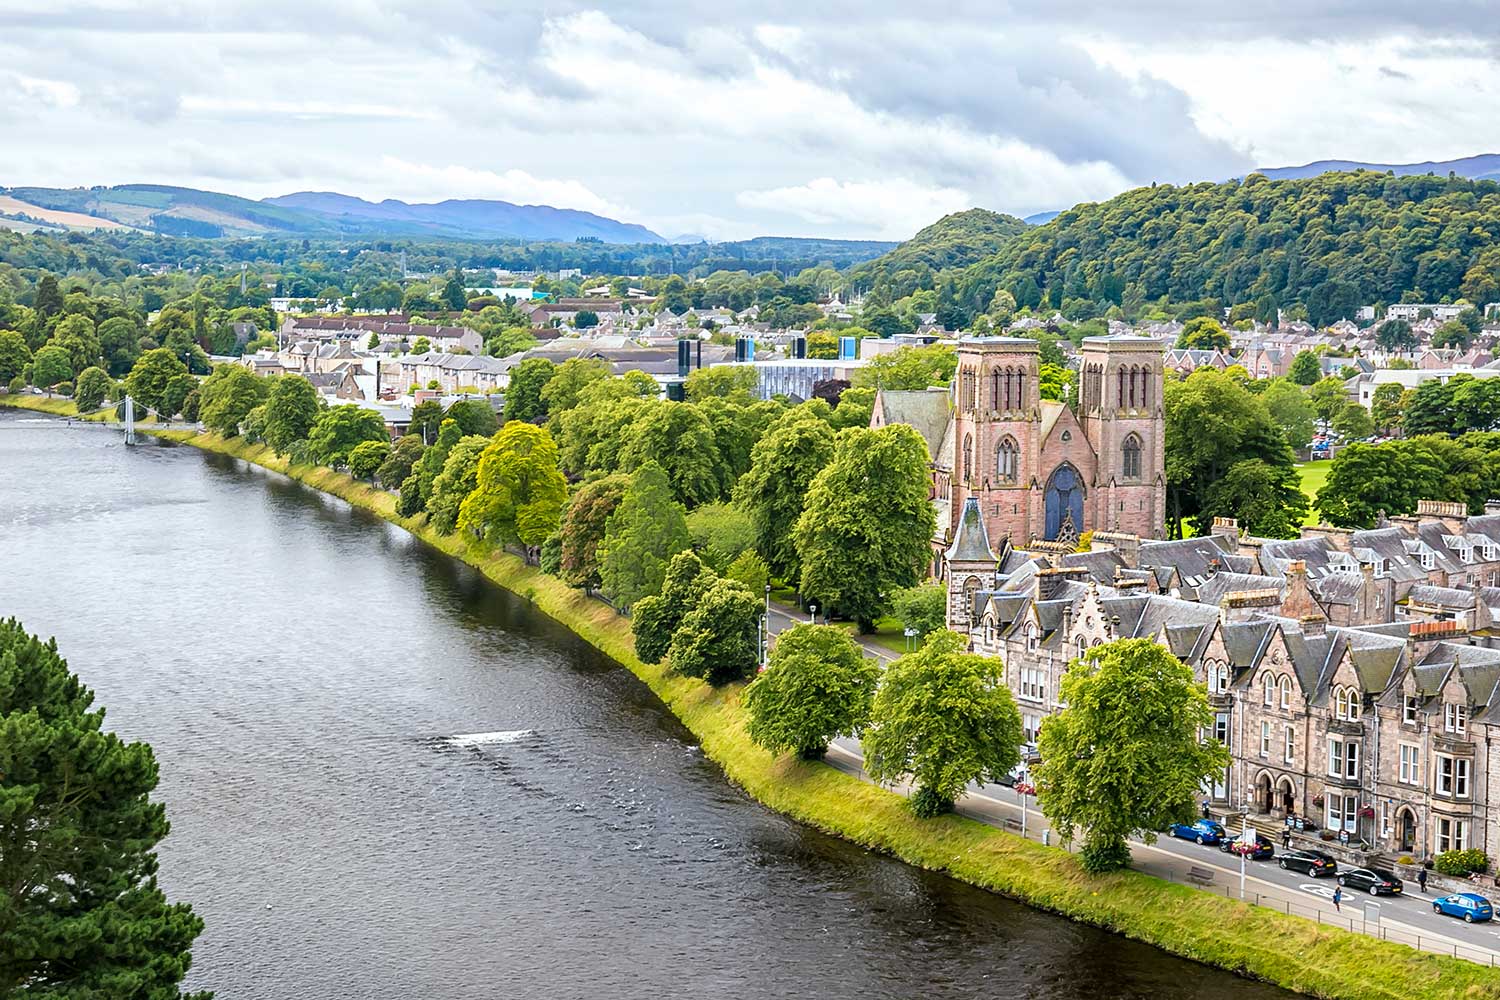 A view from the river of Inverness, known as the Capital of the Scottish Highlands.